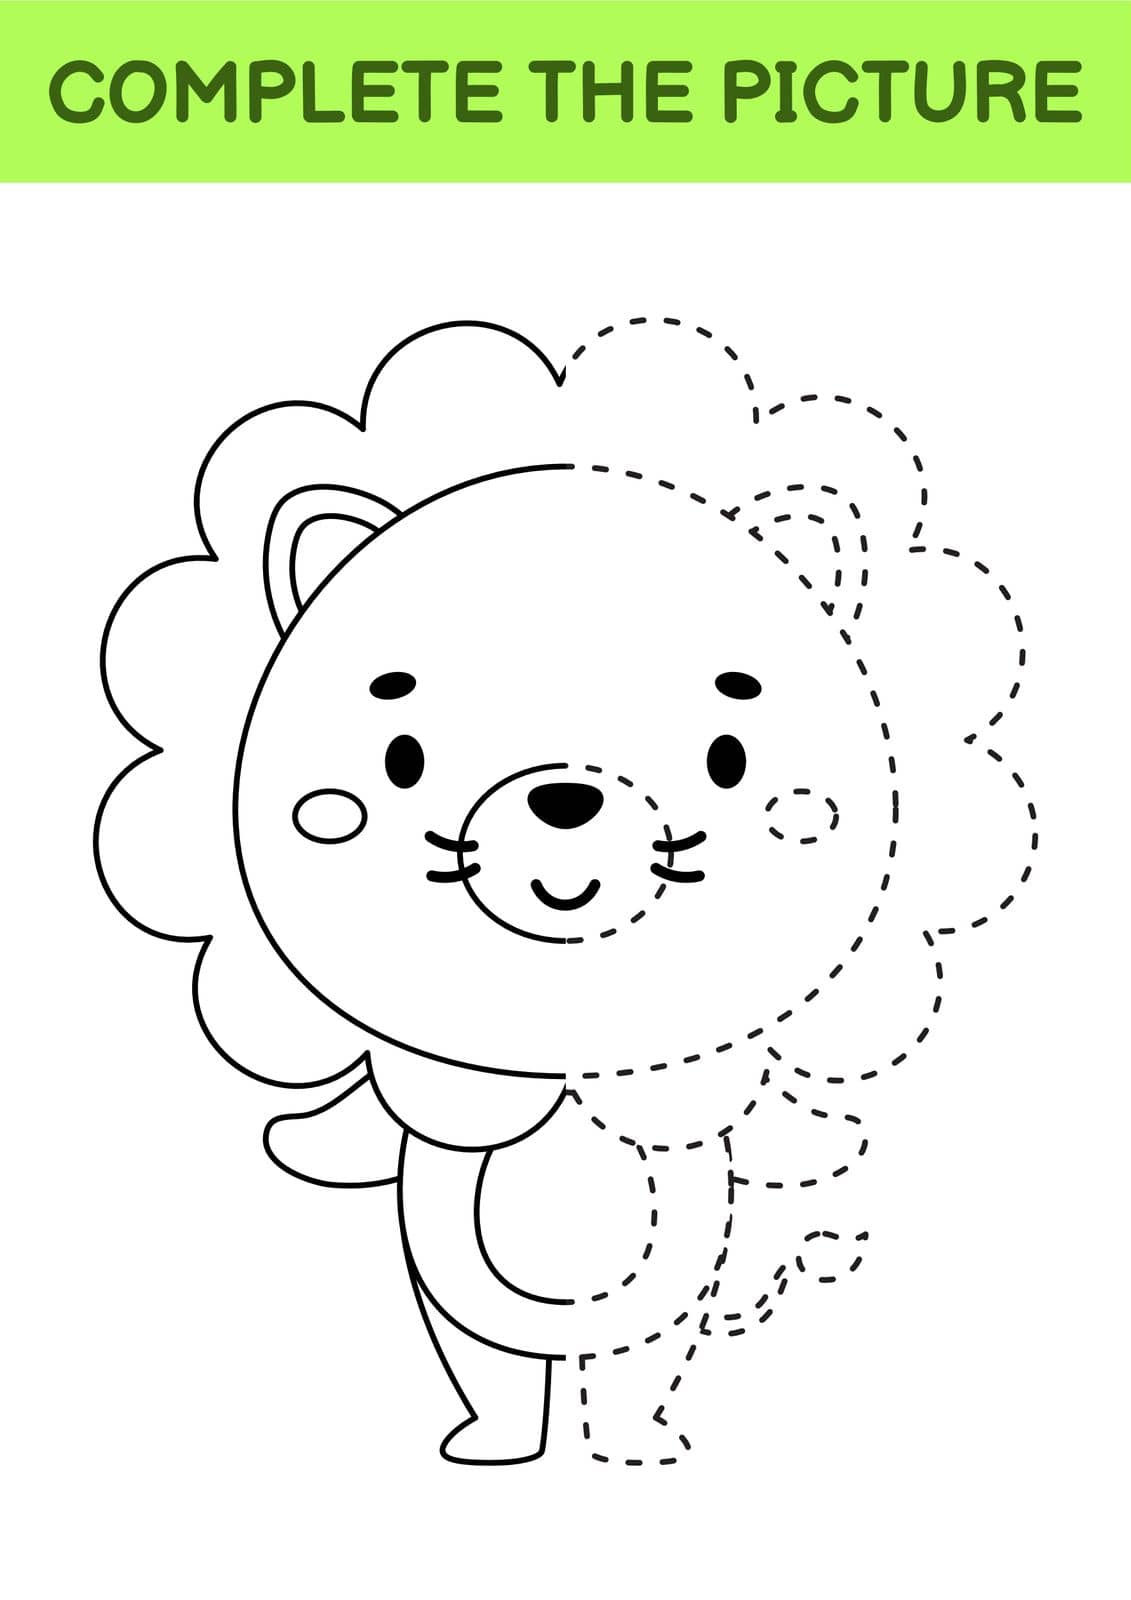 Complete drawn picture of cute lion. Coloring book. Dot copy game. Handwriting practice, drawing skills training. Education developing printable worksheet. Activity page. Vector illustration by Melnyk